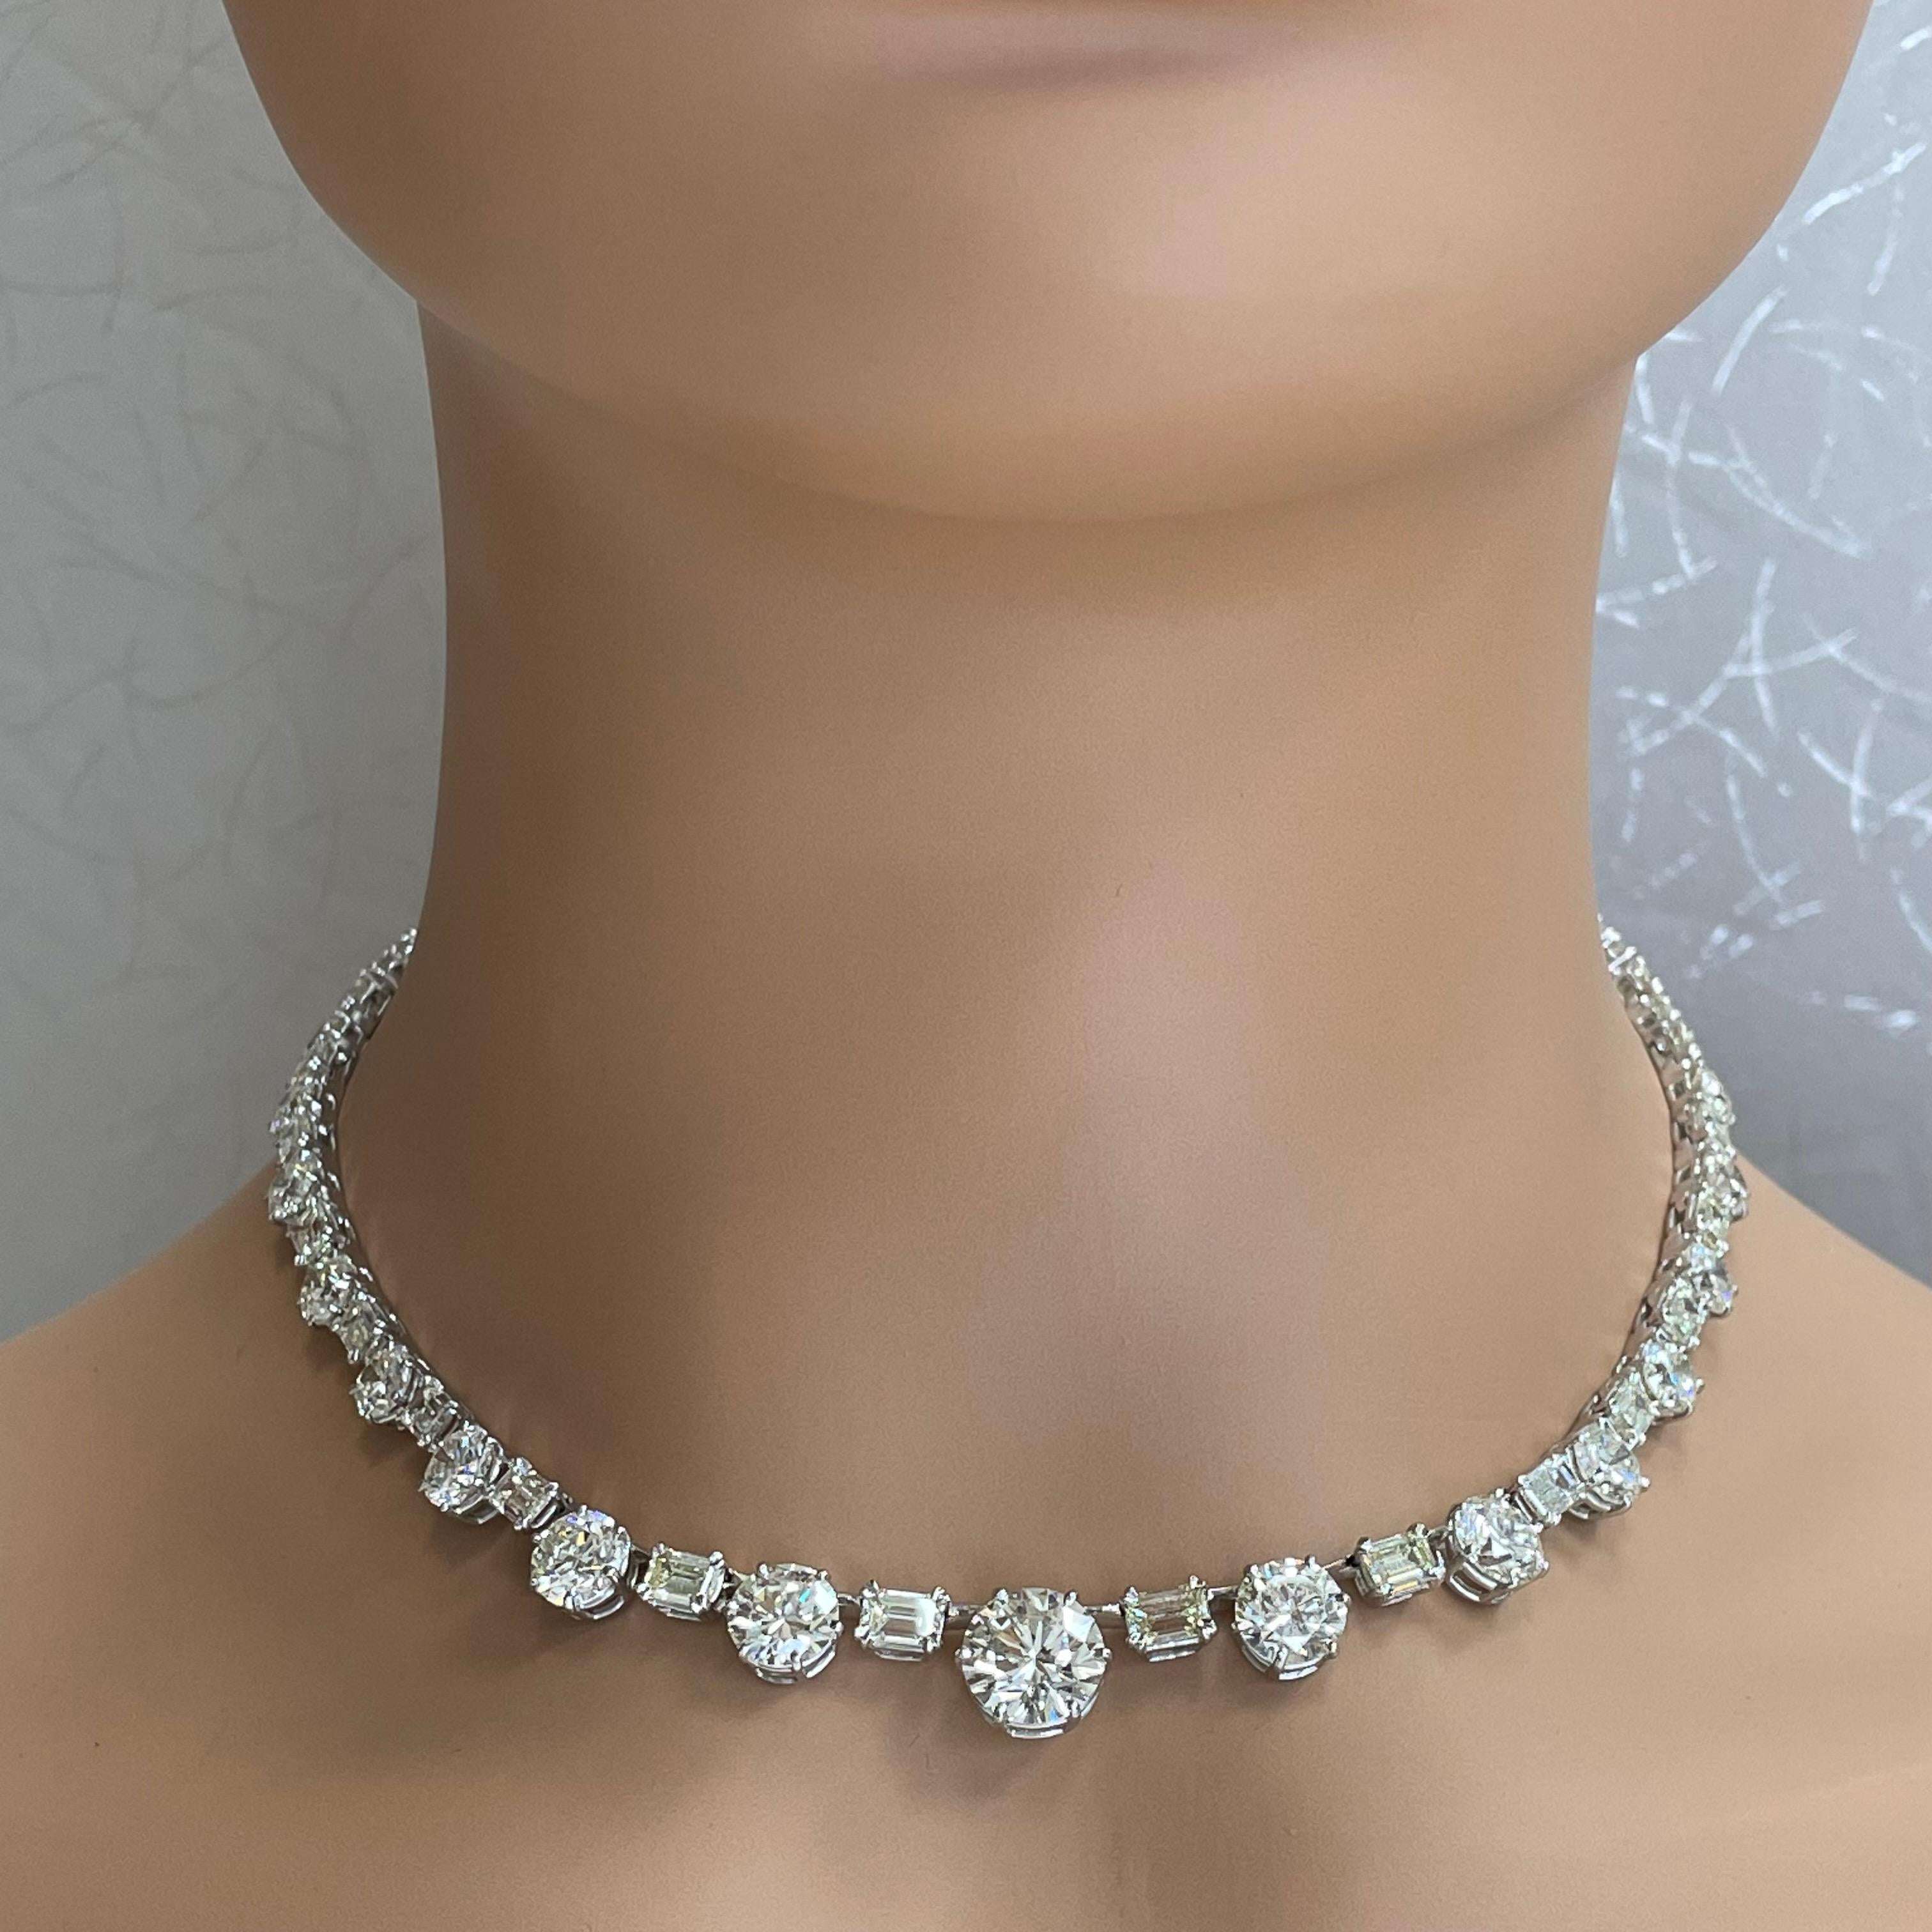 A jewel for generations, this stunning diamond necklace is designed to take your breath away. With minimal white gold showcasing fine solitaire diamonds with the largest being a 4 ct round diamond, it is a jewel to covet. 

Center Diamond Shape: